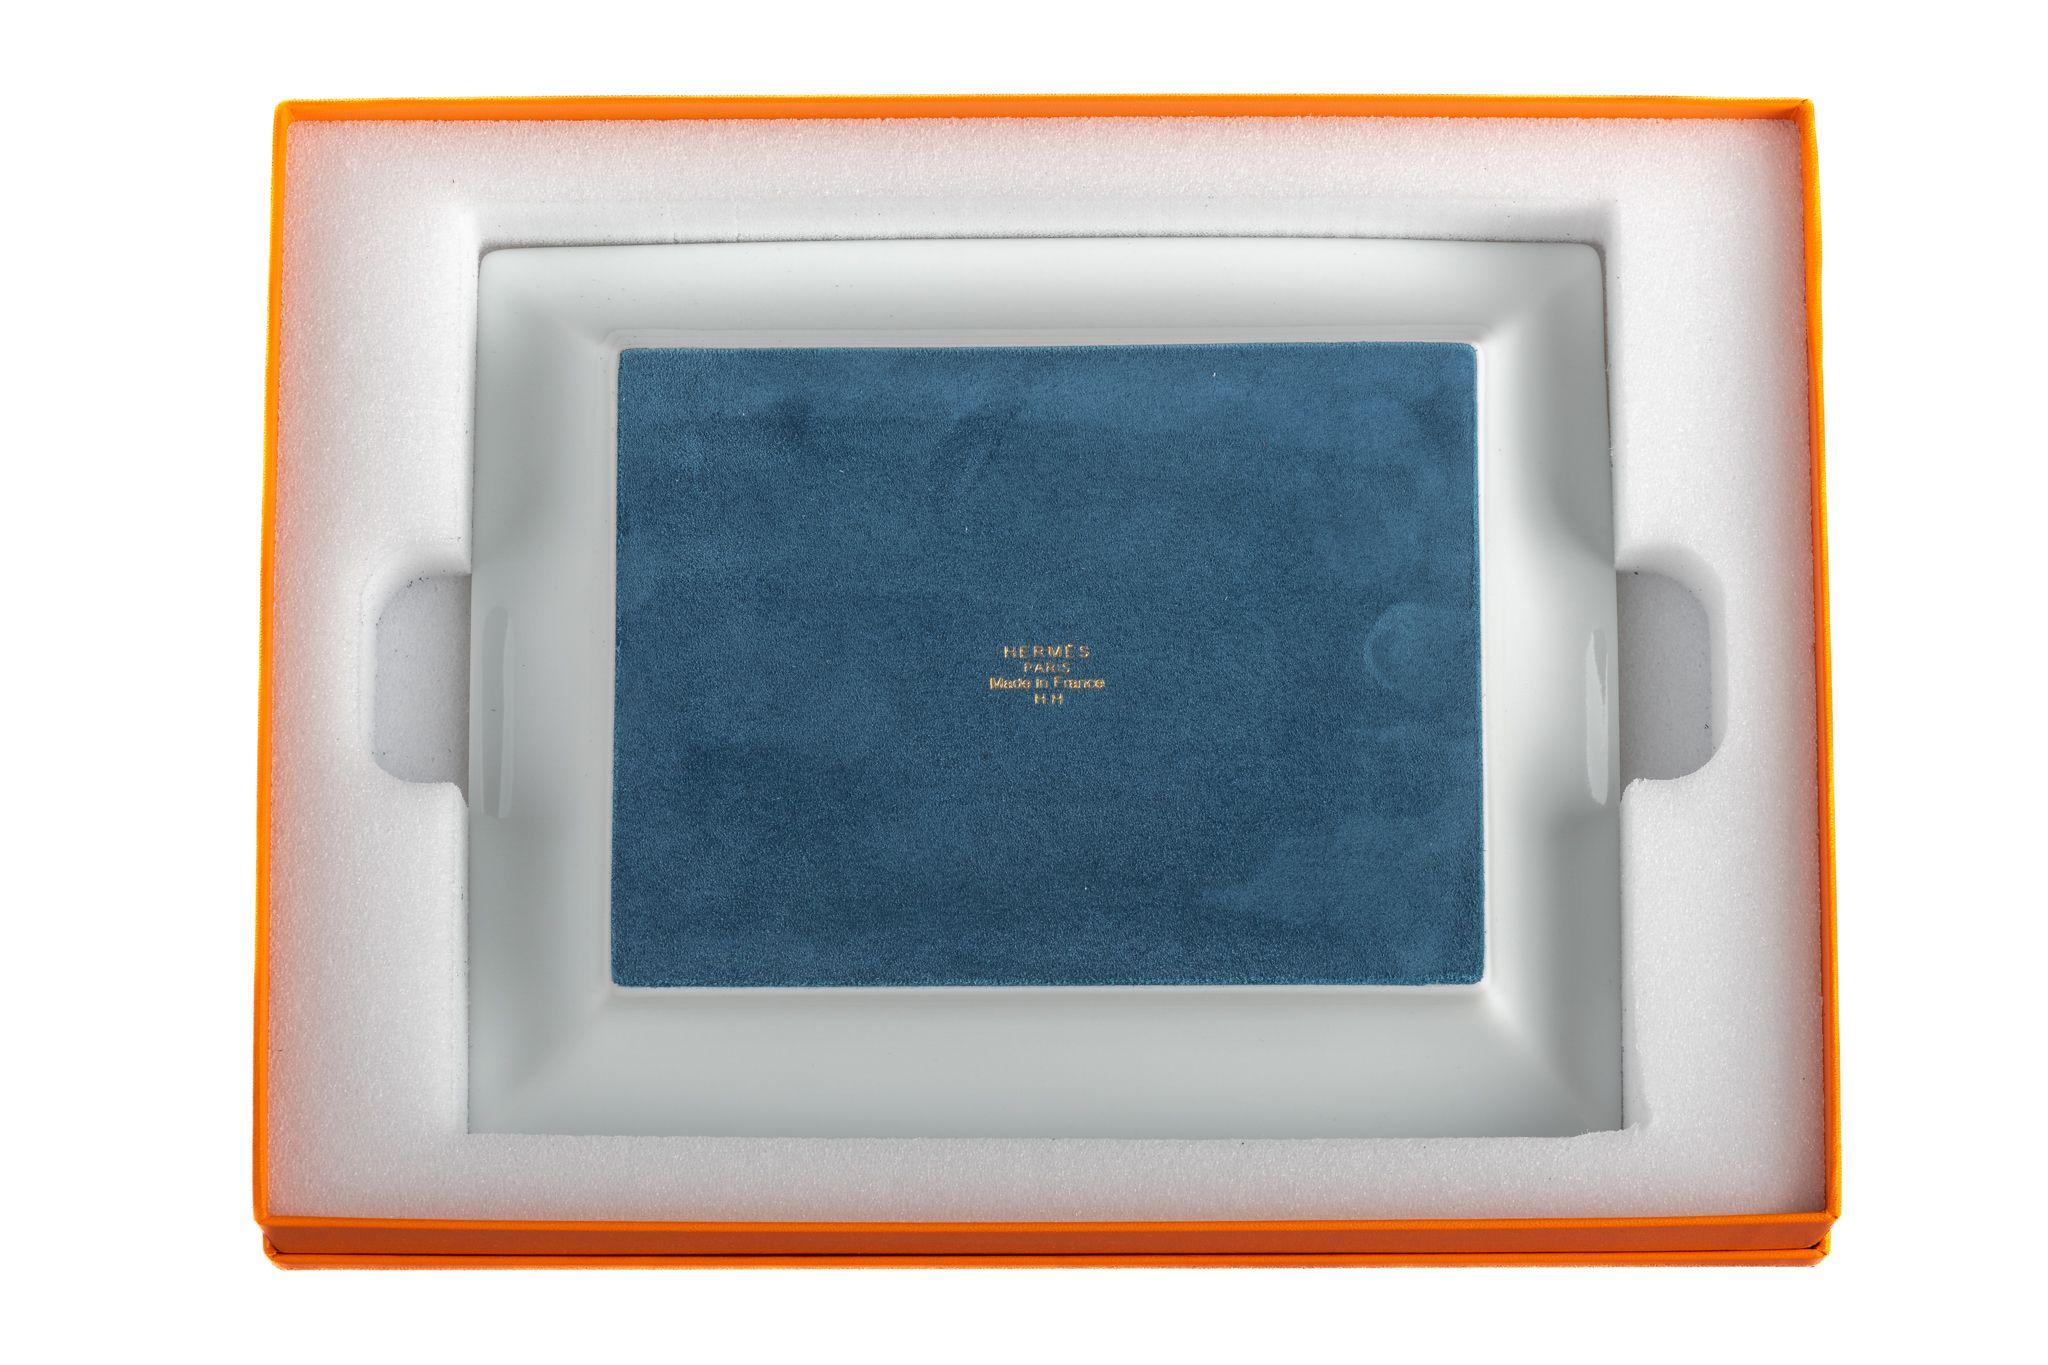 Hermes Story BNIB Porcelain Ashtray In New Condition For Sale In West Hollywood, CA